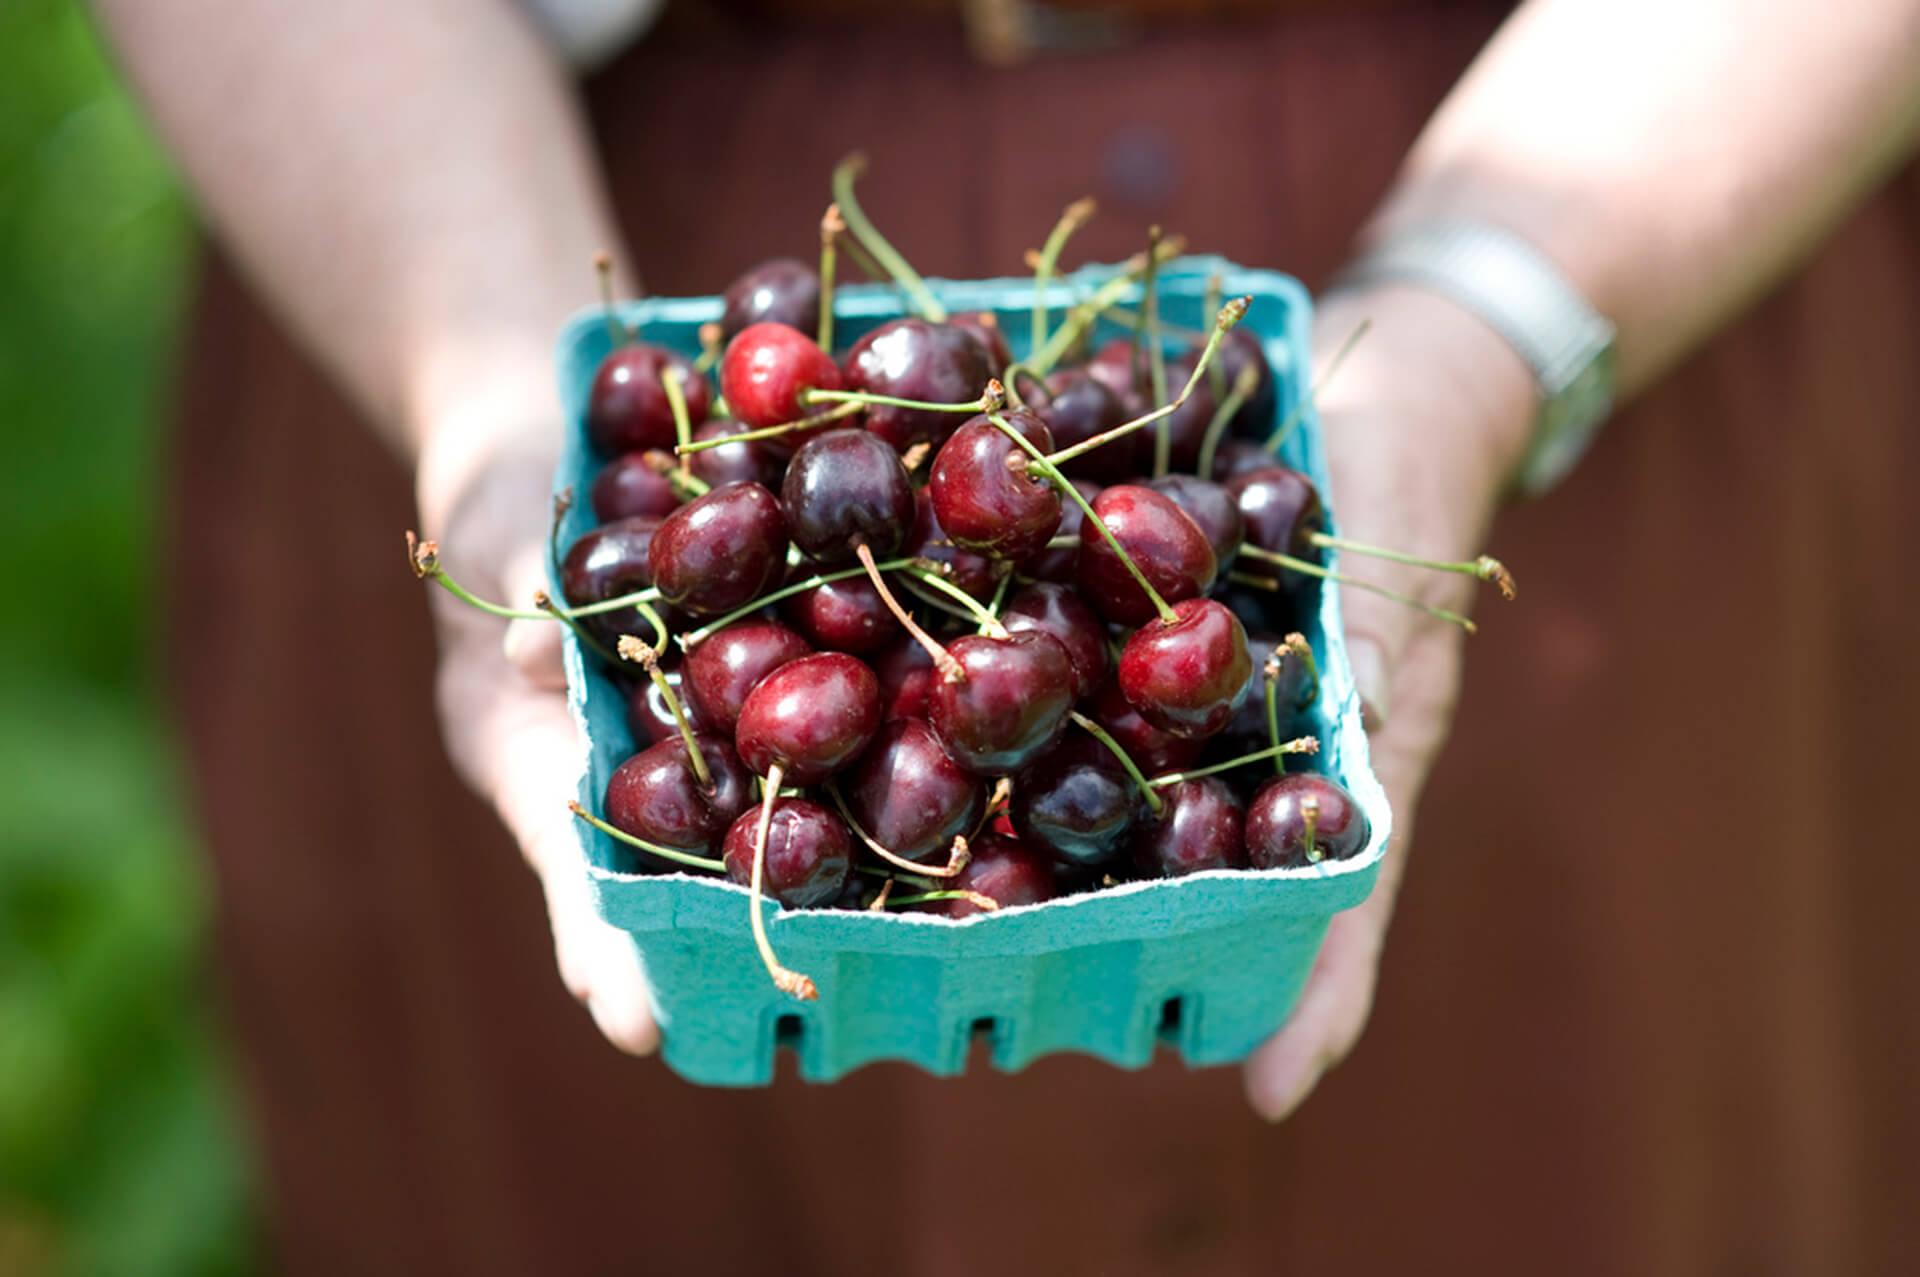 Hands outstretched holding blue basket full of sour cherries